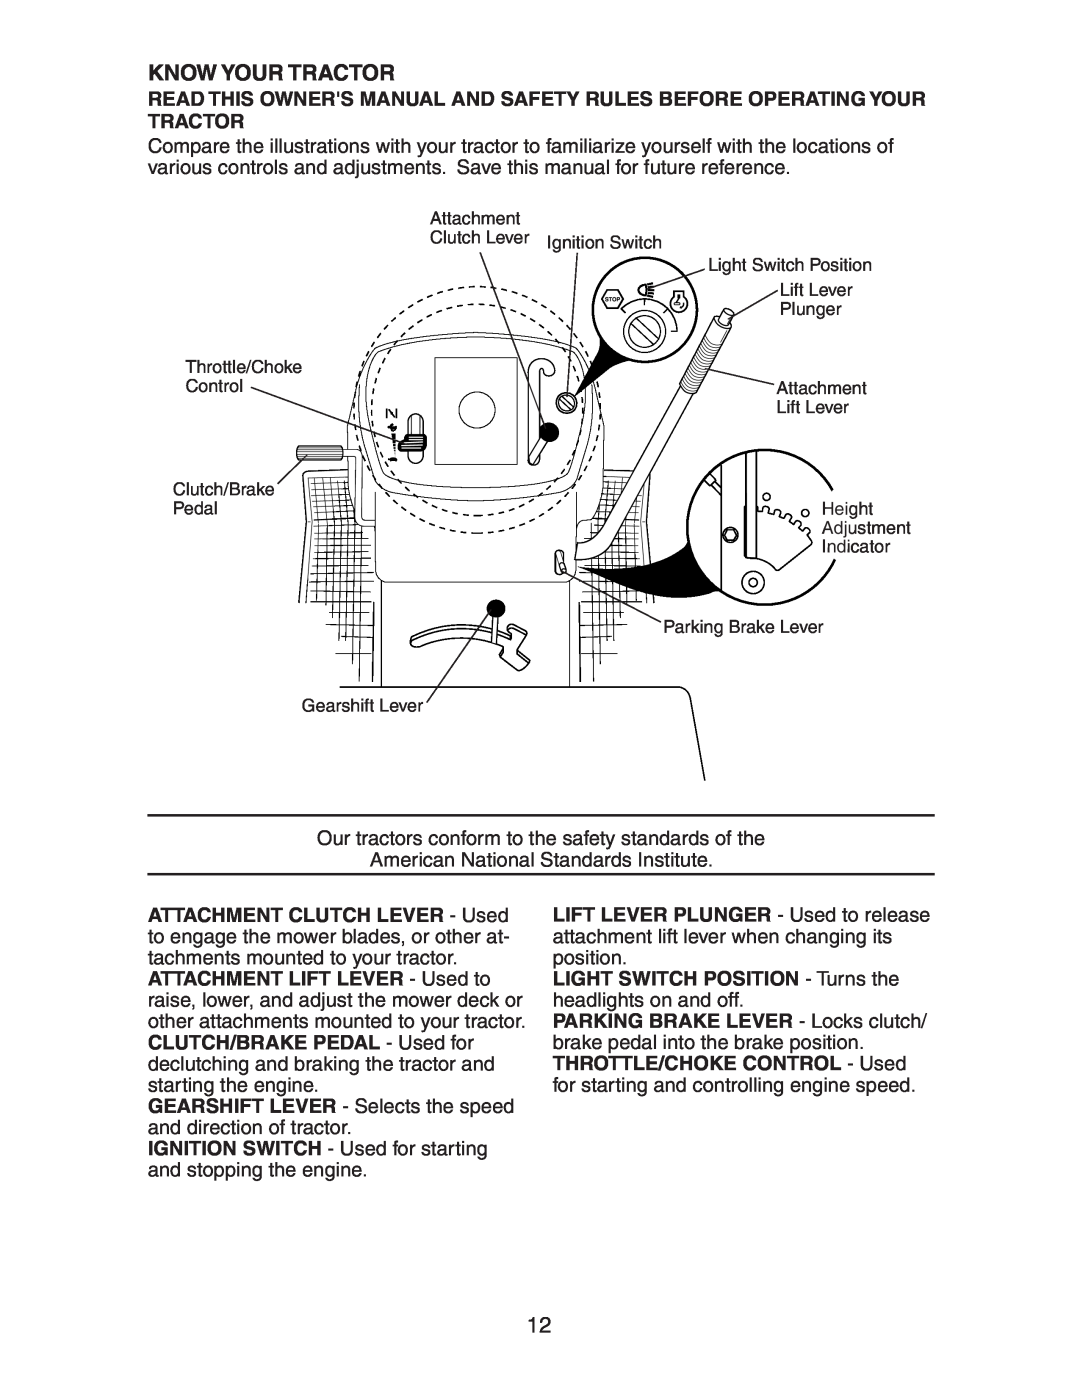 Electrolux AG15538B manual Know Your Tractor, LIGHT SWITCH POSITION - Turns the headlights on and off 